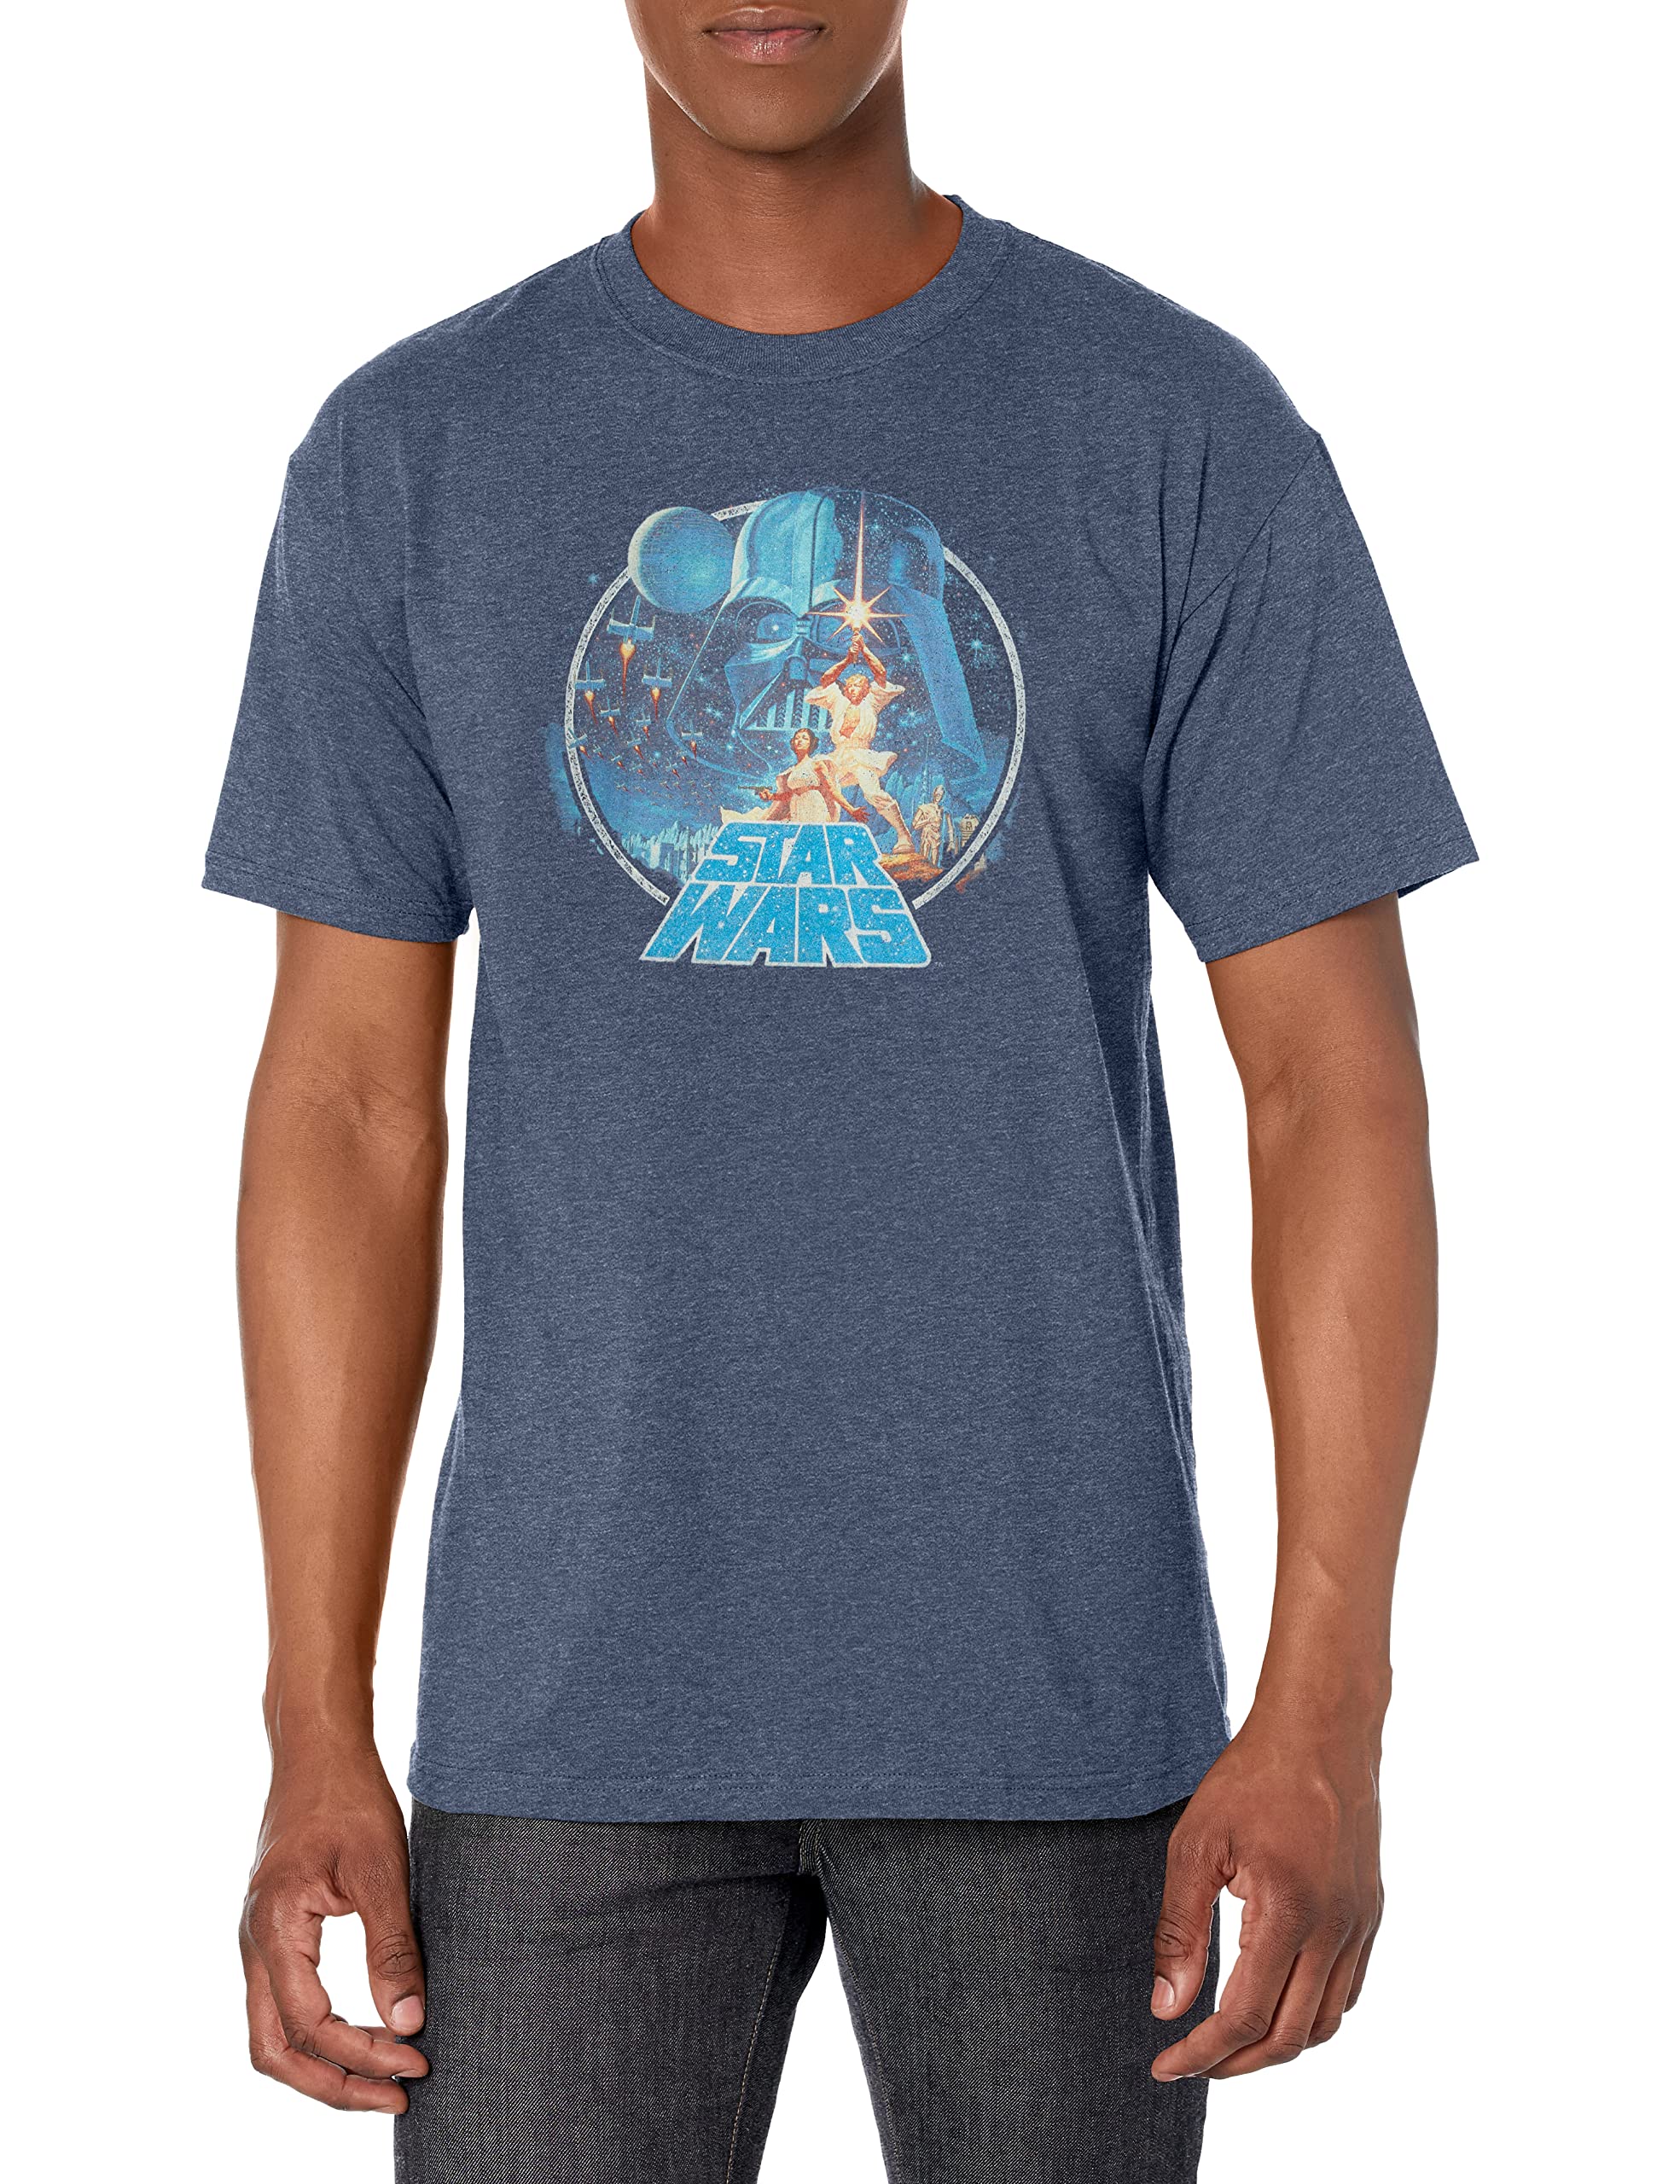 Star Wars Men's Vintage Victory Tee (Navy Blue Heather) $4.14 (Size M), $4.17 (Size L) + Free Shipping w/ Prime or on $35+